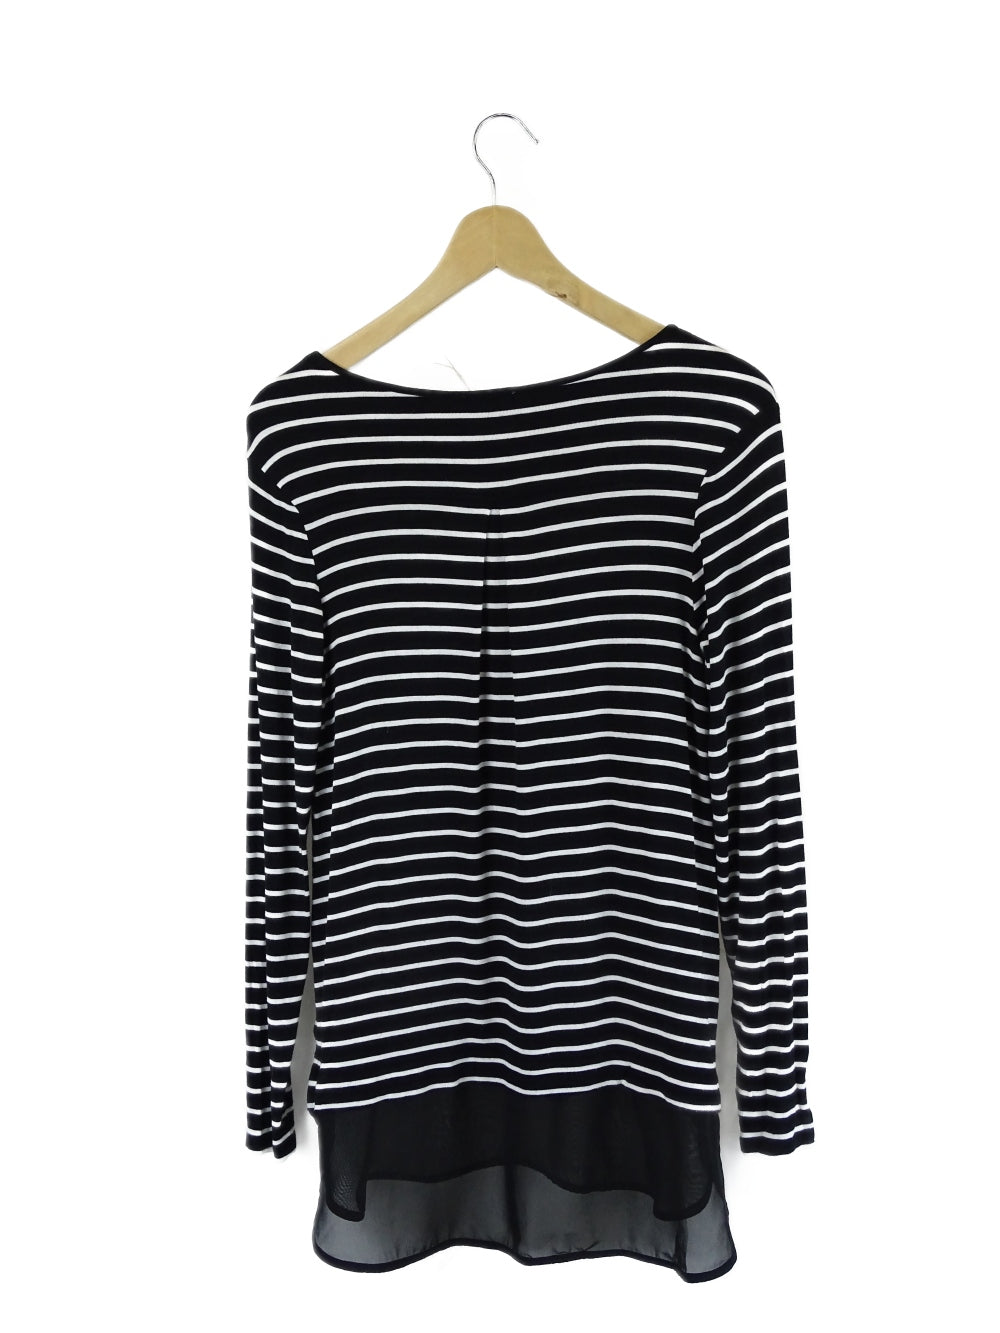 Witchery Black And White Long-Sleeve Top S